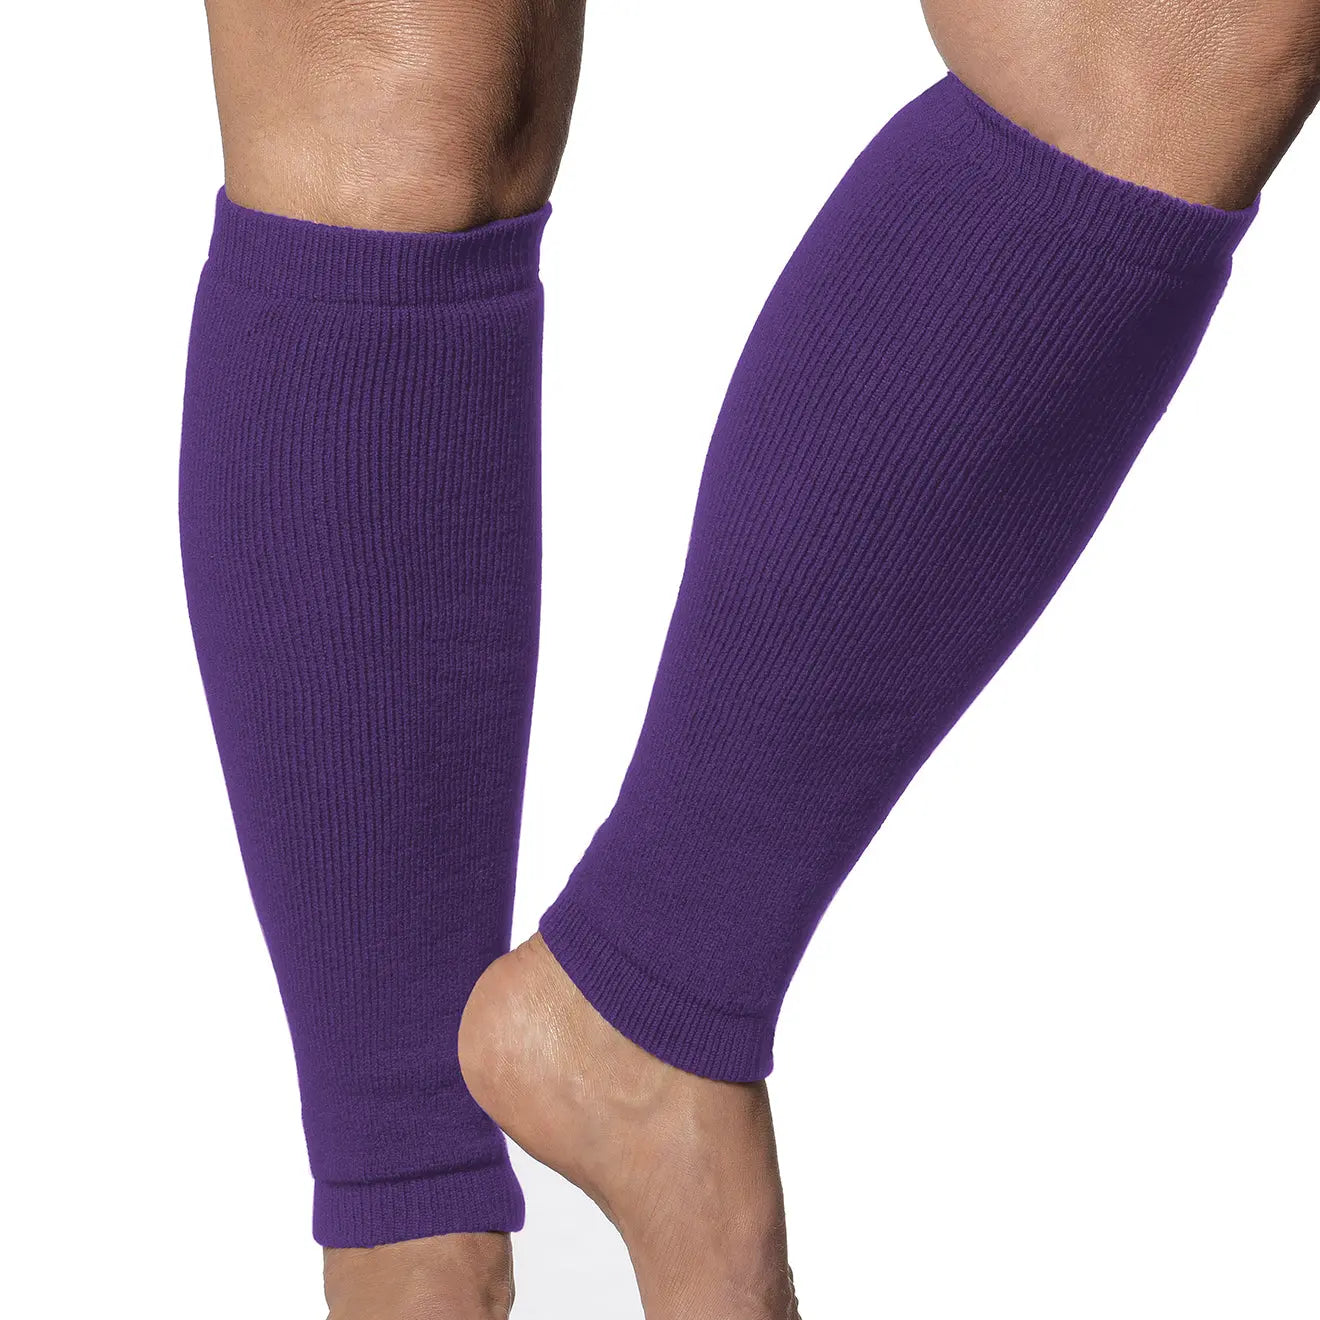 Leg Sleeves - Light Weight. Purple Frail Skin Protectors. Protection From Leg Damage (pair) Limbkeepers